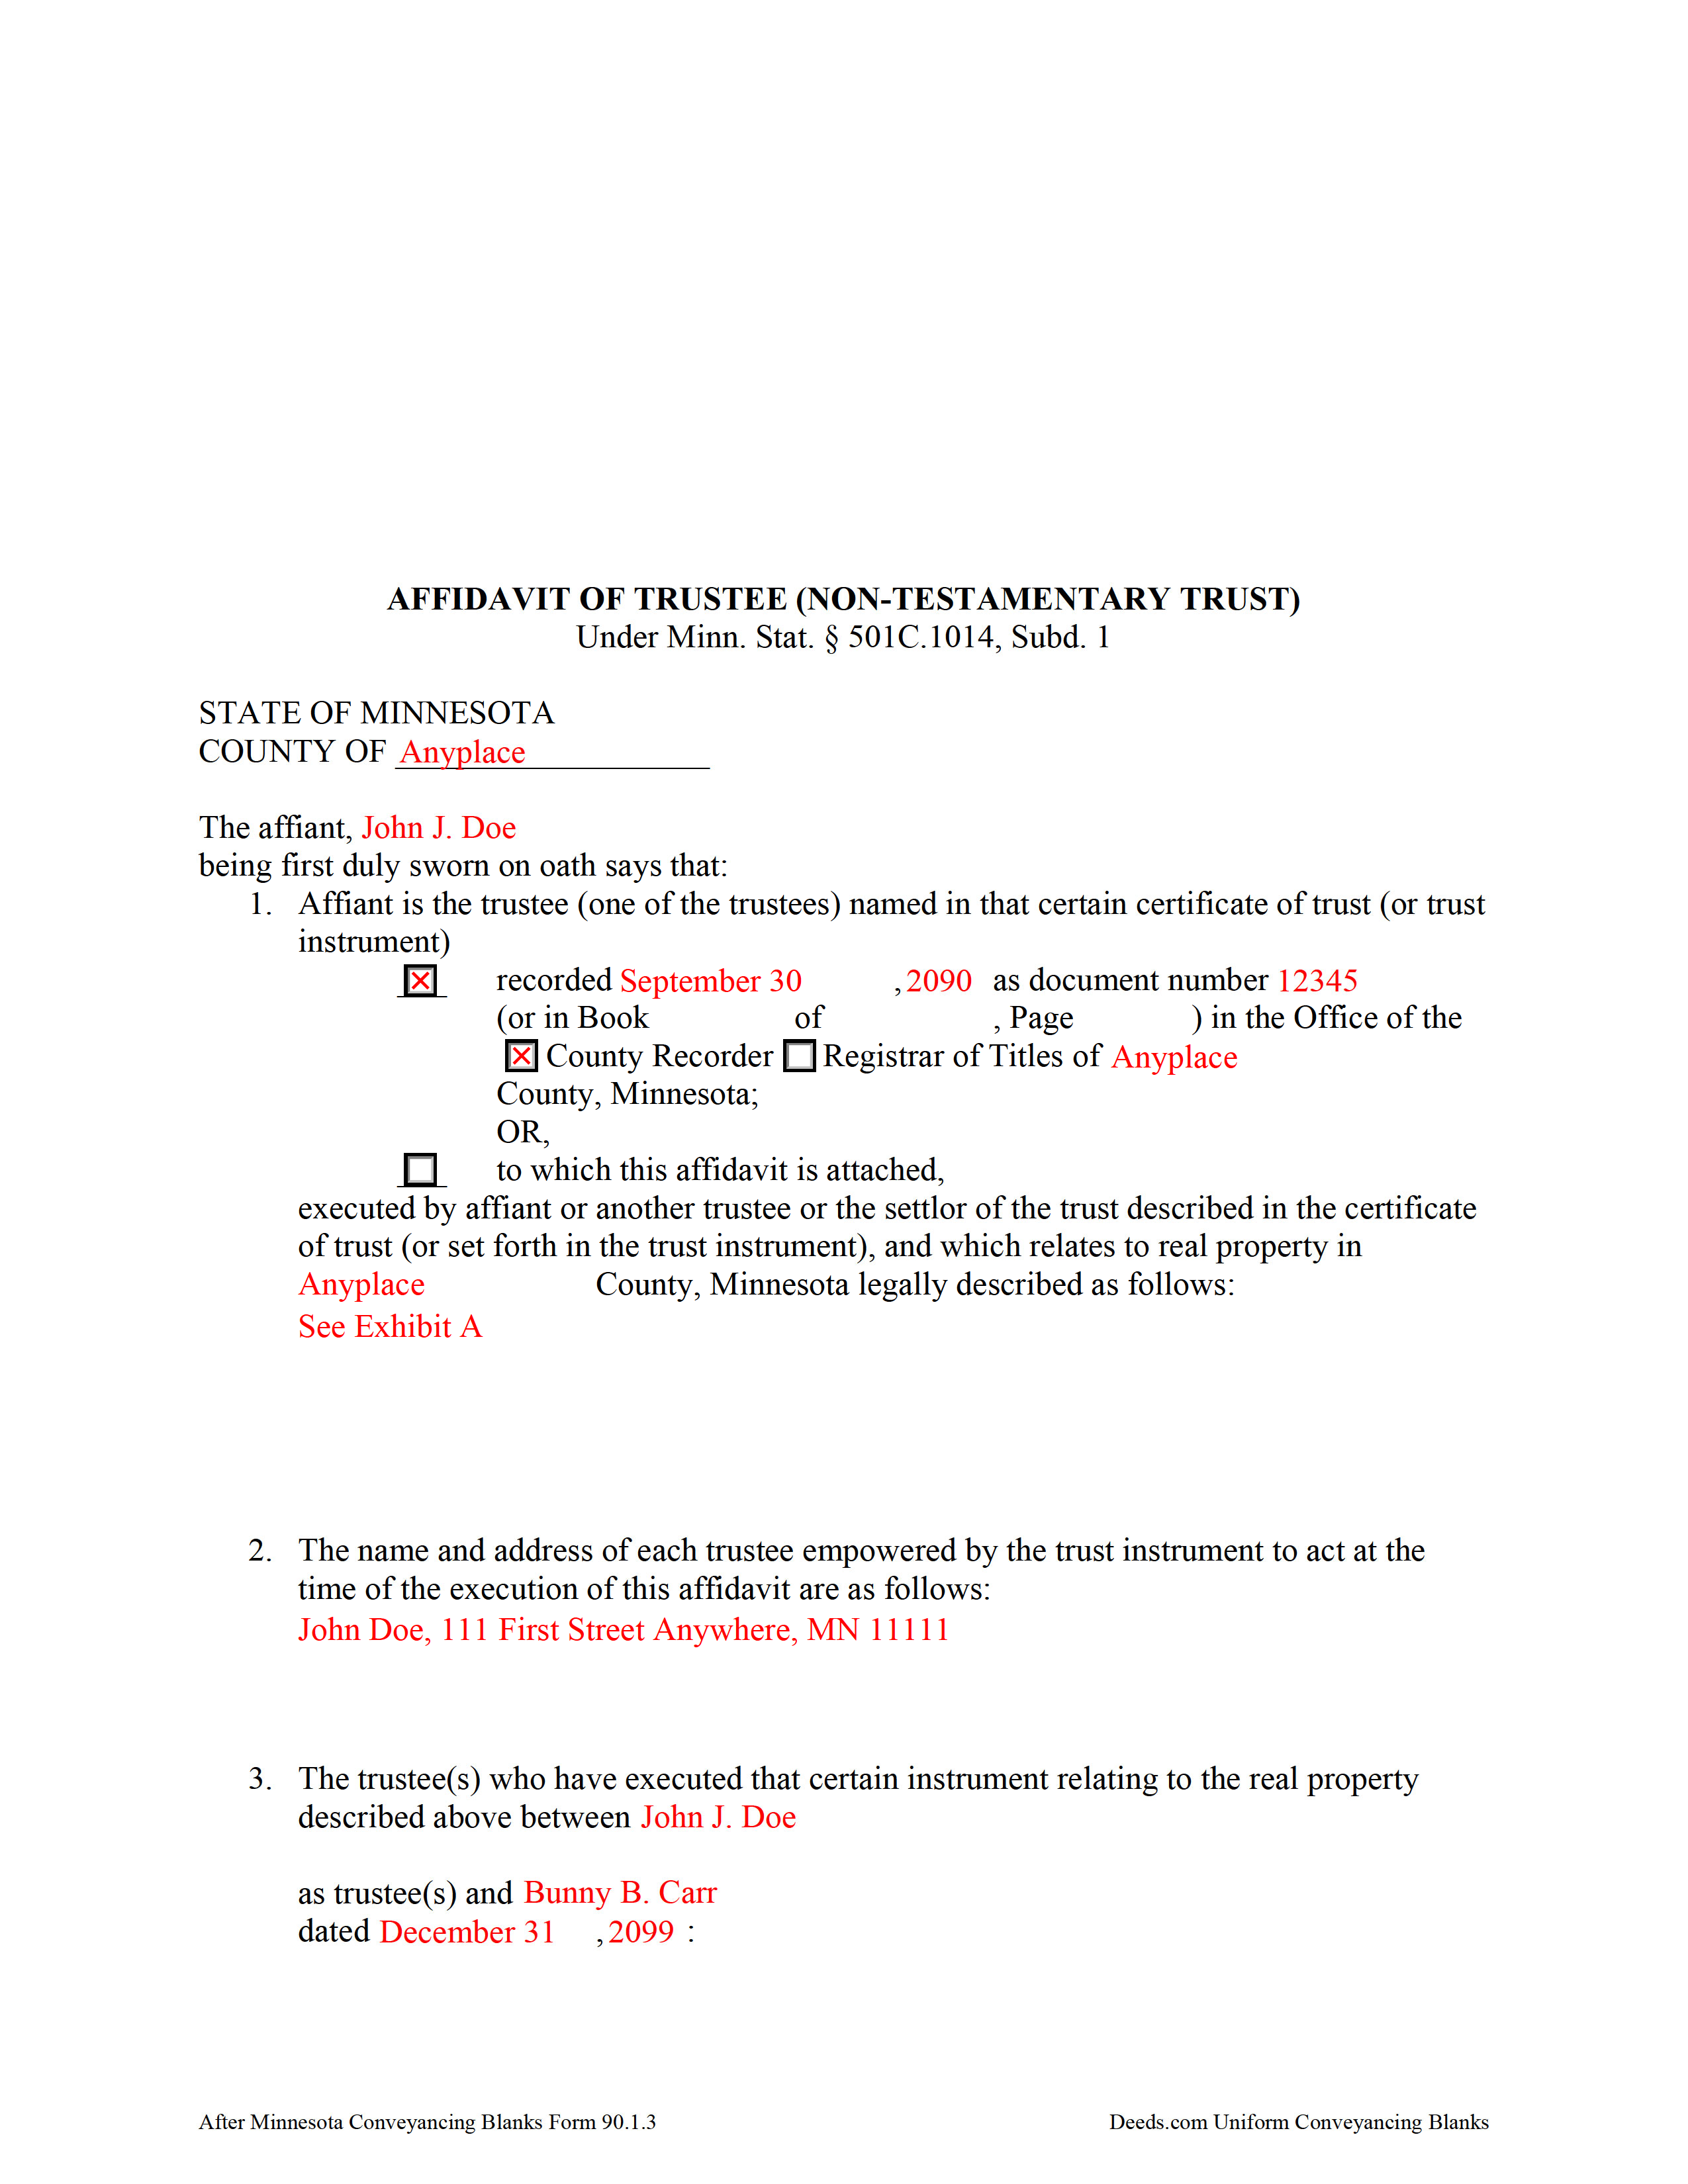 Completed Example of the Affidavit of Trustee Document